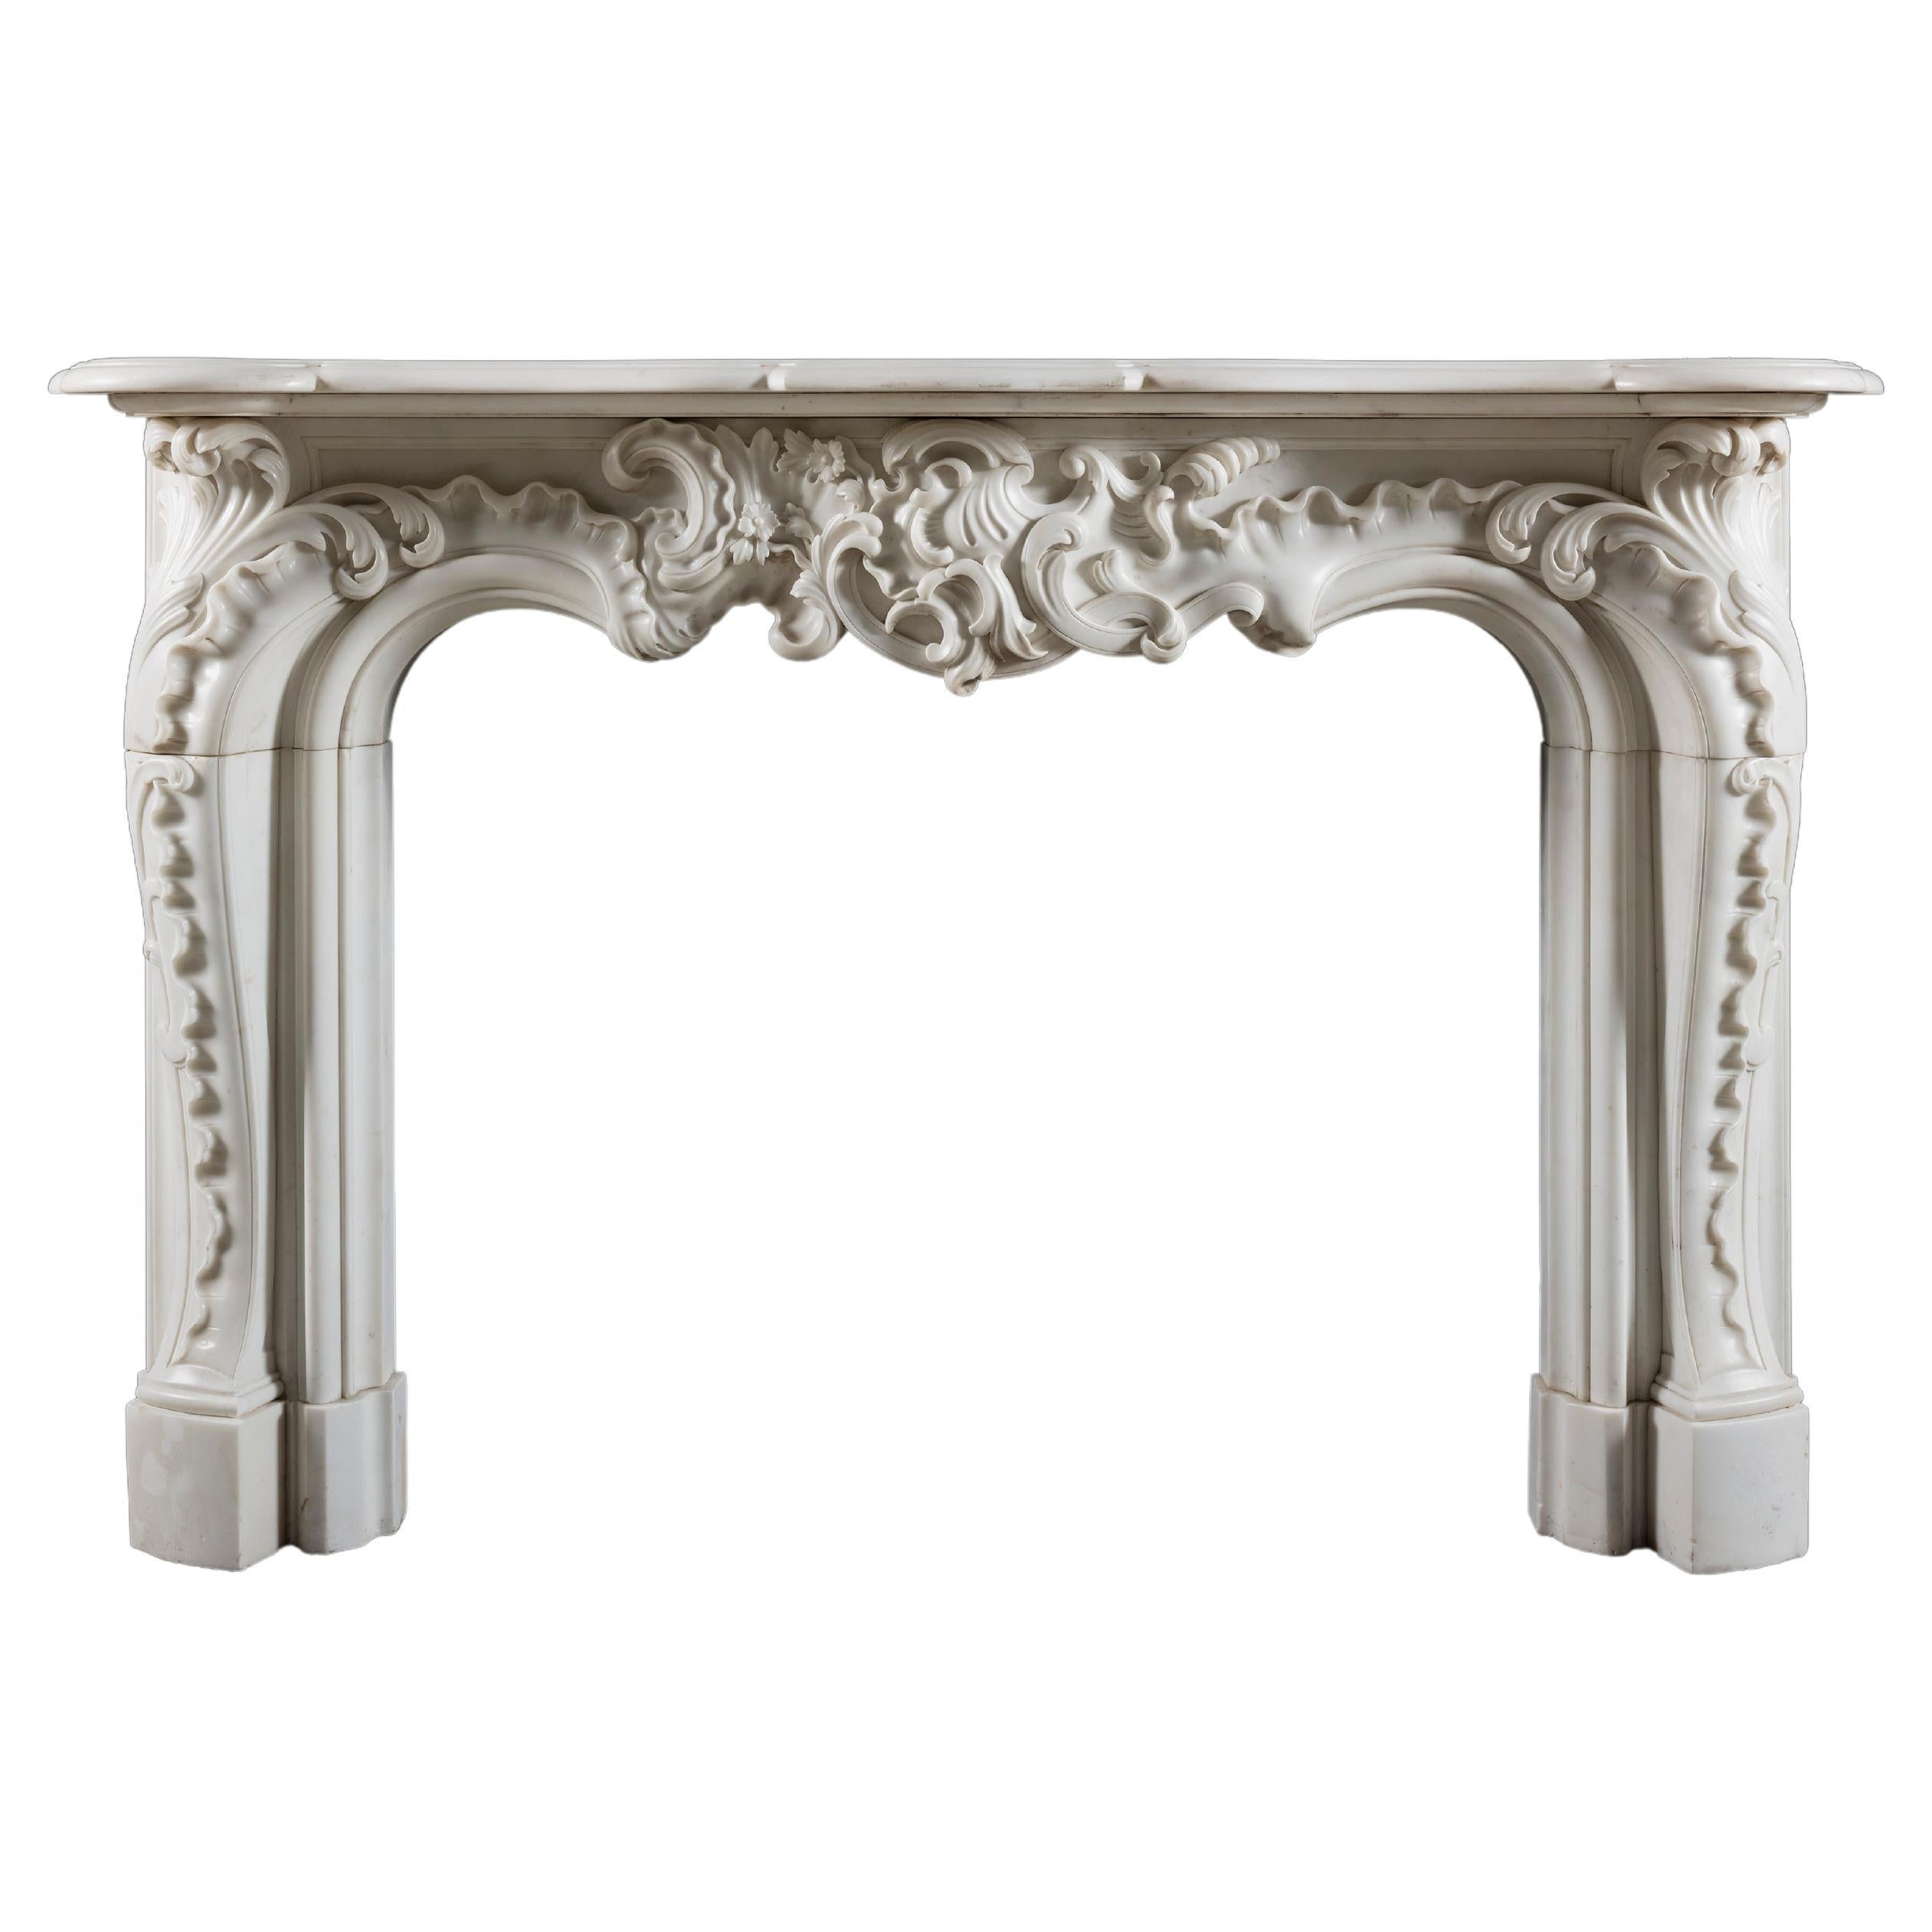 A Rococo 19th century chimneypiece of very large scale in white statuary marble.